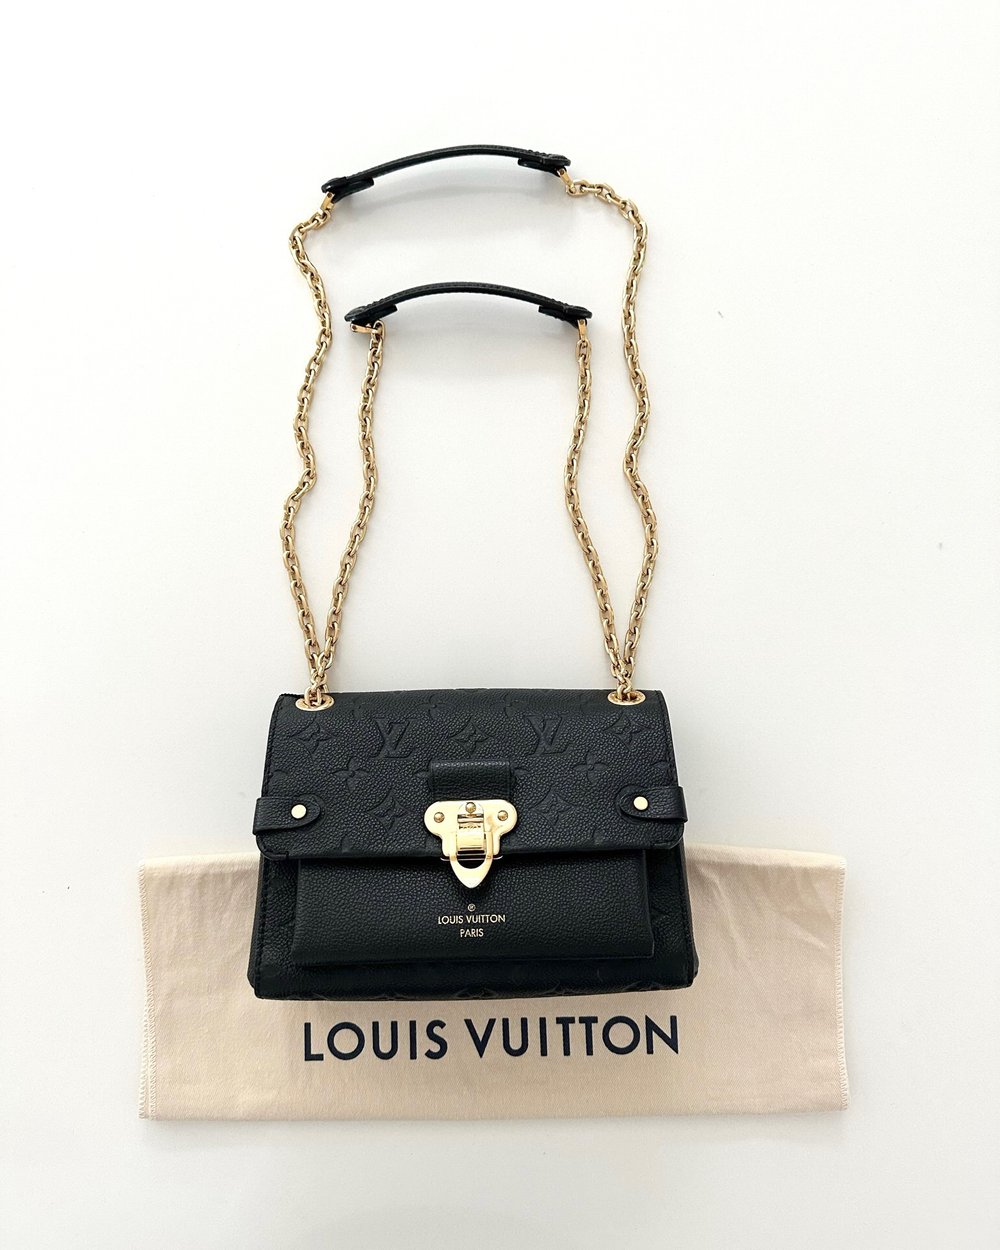 Nicole Cripe Style on Instagram: *SOLD* Just in… Louis Vuitton